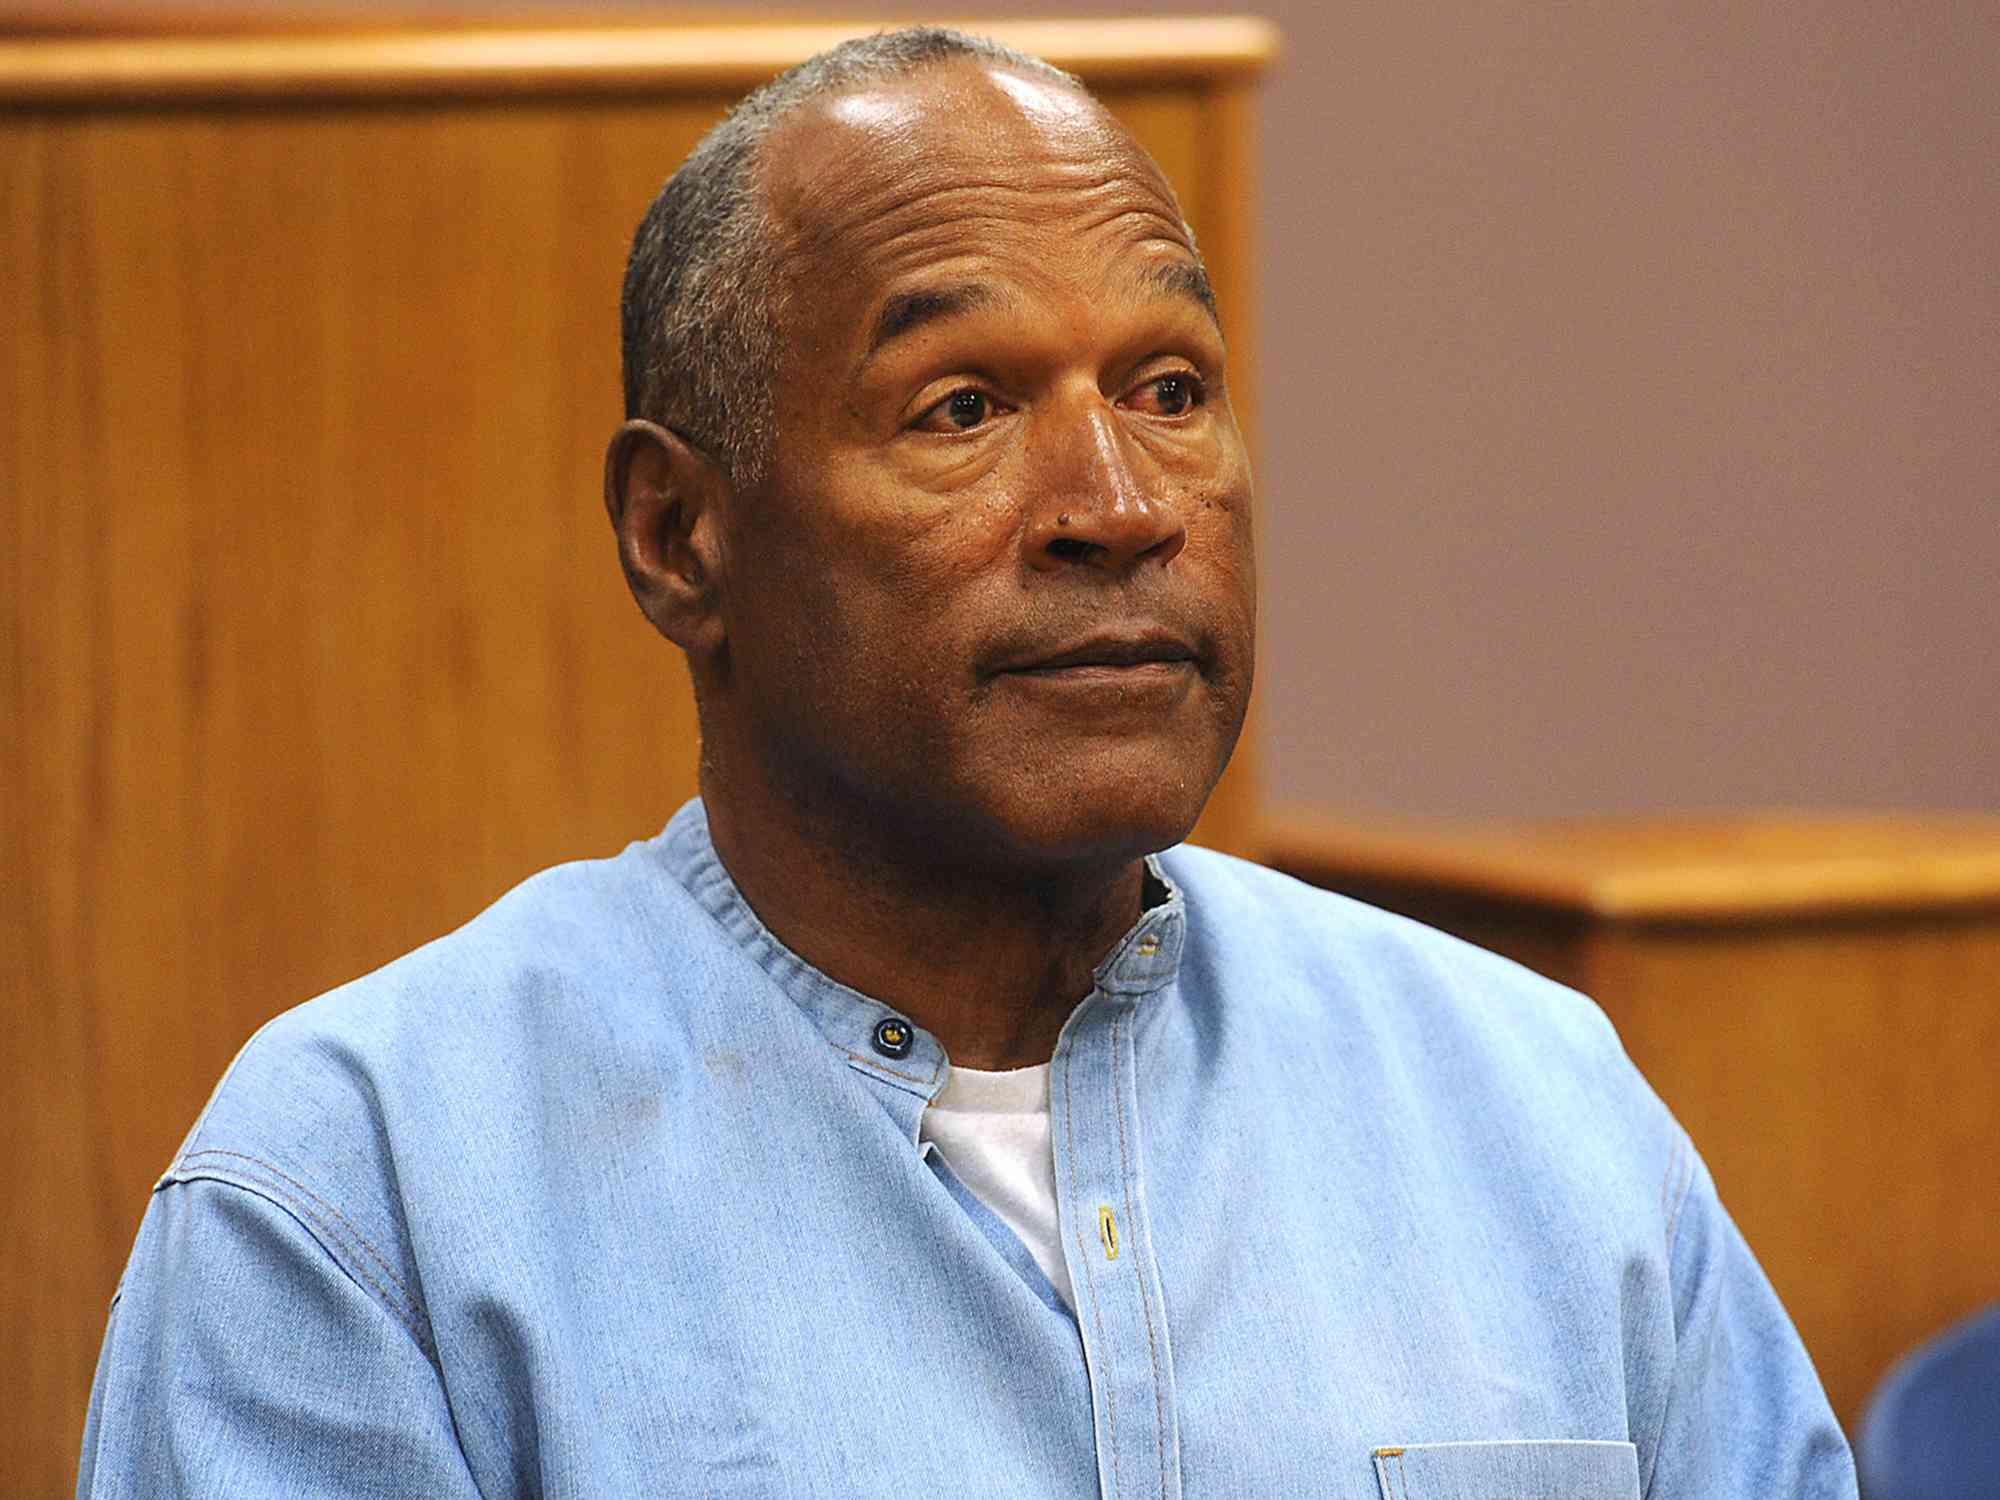 O.J. Simpson listens during a parole hearing at Lovelock Correctional Center in Lovelock, Nevada on July 20, 2017.